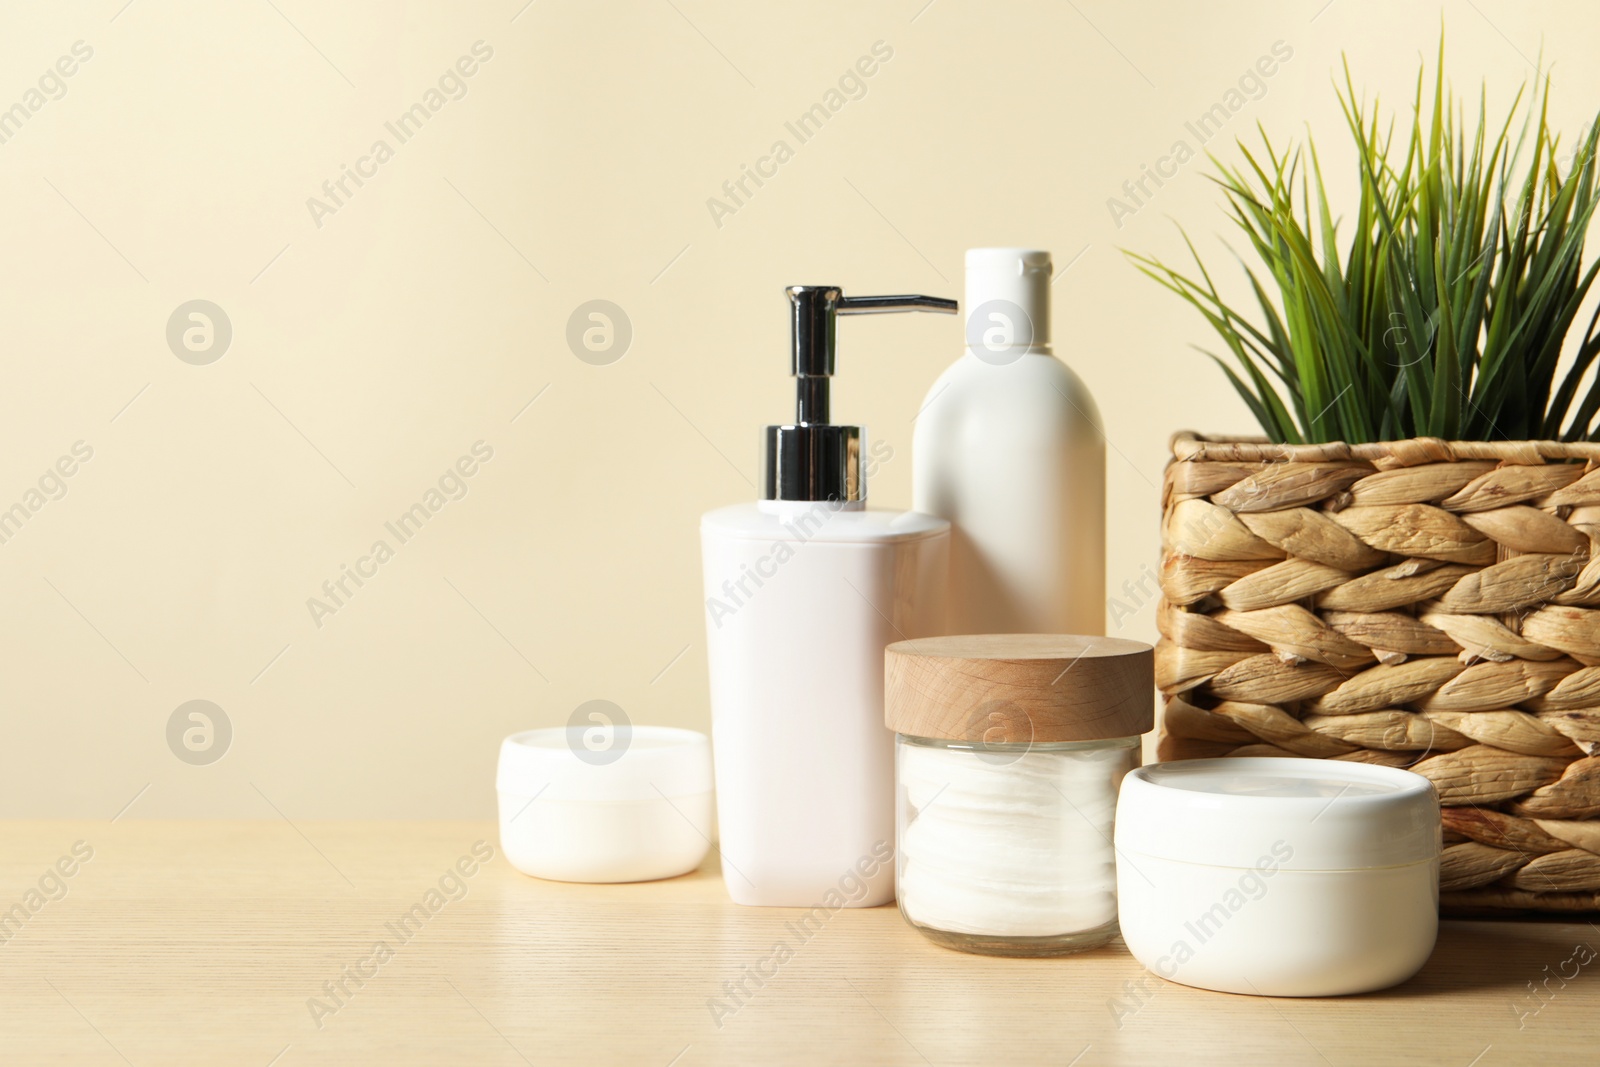 Photo of Different bath accessories and houseplant on wooden table against beige background, closeup. Space for text